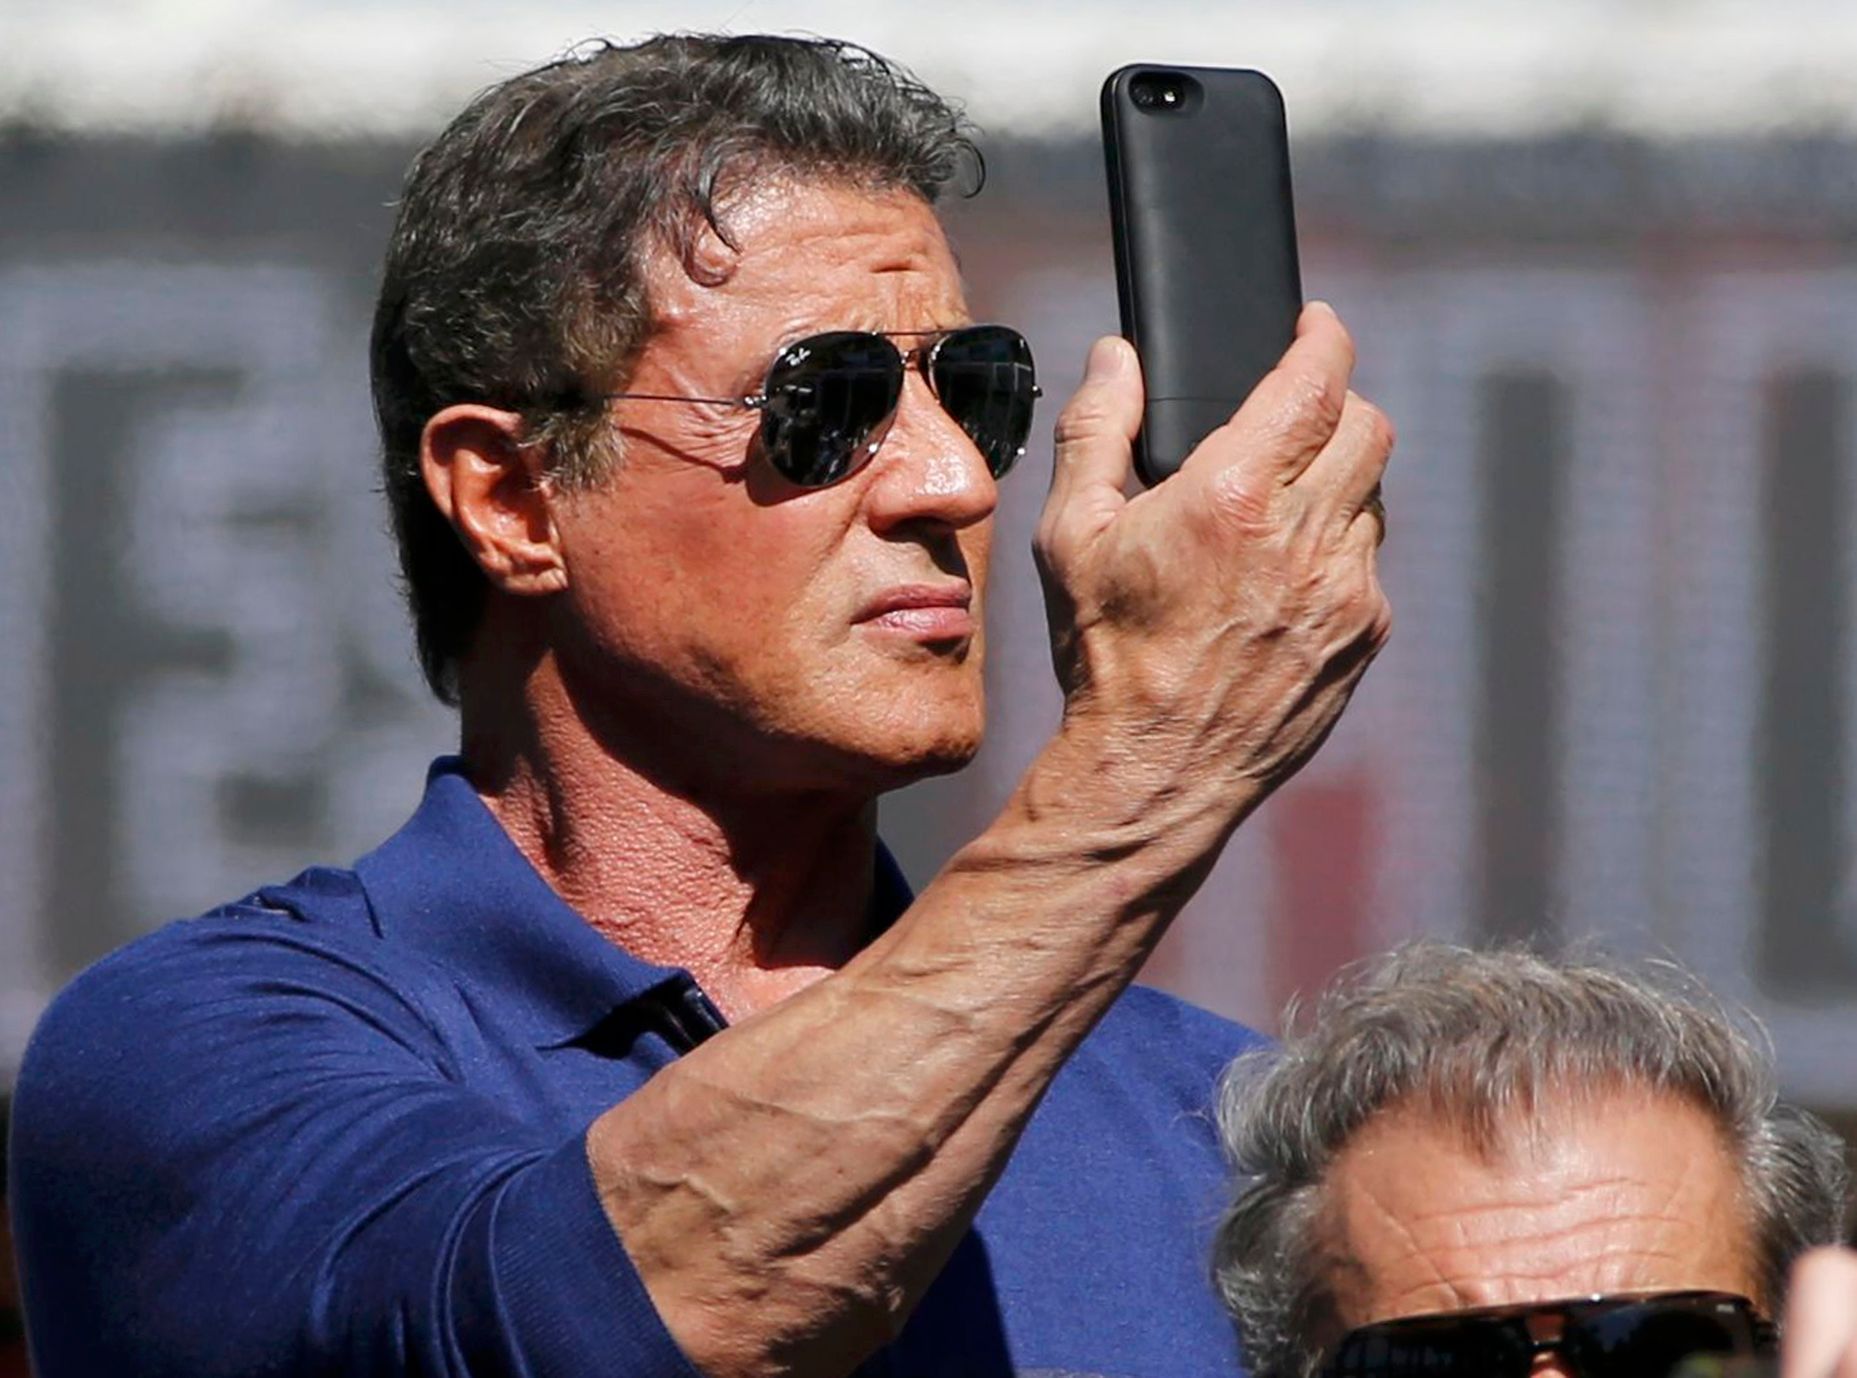 Cast member Sylvester Stallone holds a mobile phone as he poses on a tank arriving on the Croisette to promote the film &quot;The Expendables 3&quot; during the 67th Cannes Film Festival in Cannes